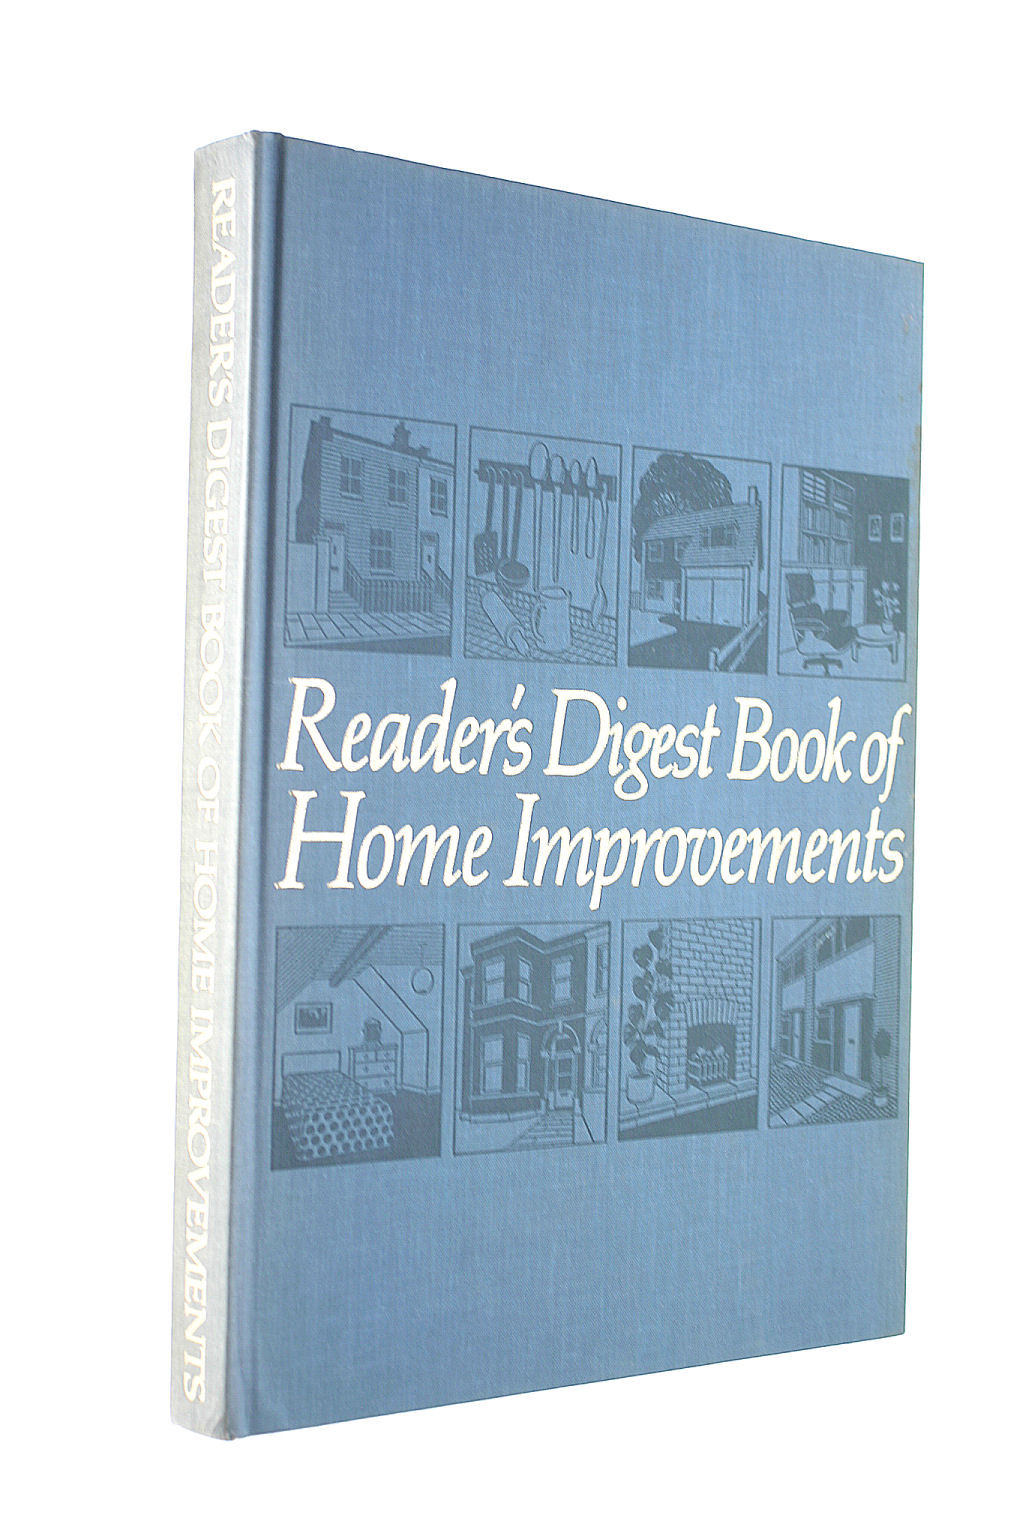 NO AUTHOR. - THE READER'S DIGEST BOOK OF HOME IMPROVEMENTS.